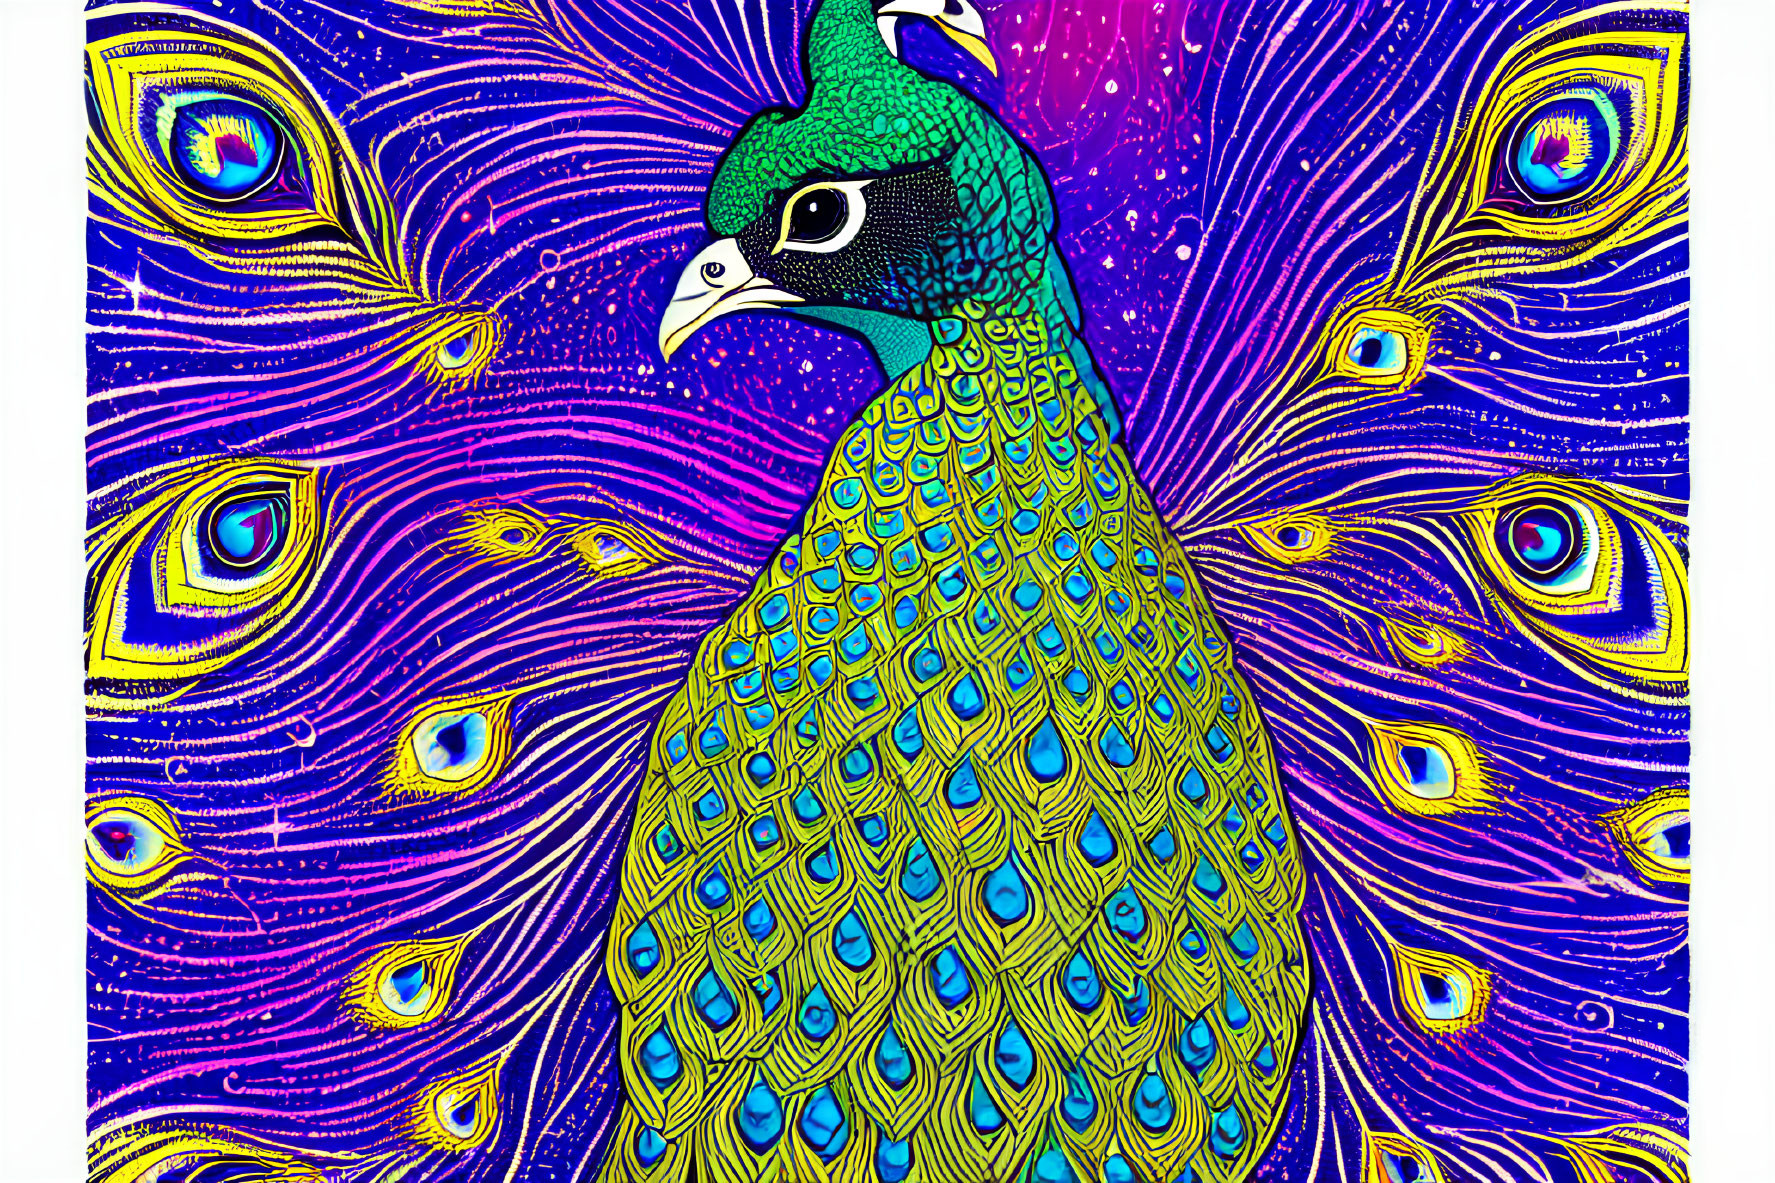 Colorful Peacock Illustration with Detailed Plumage and Eye Motifs